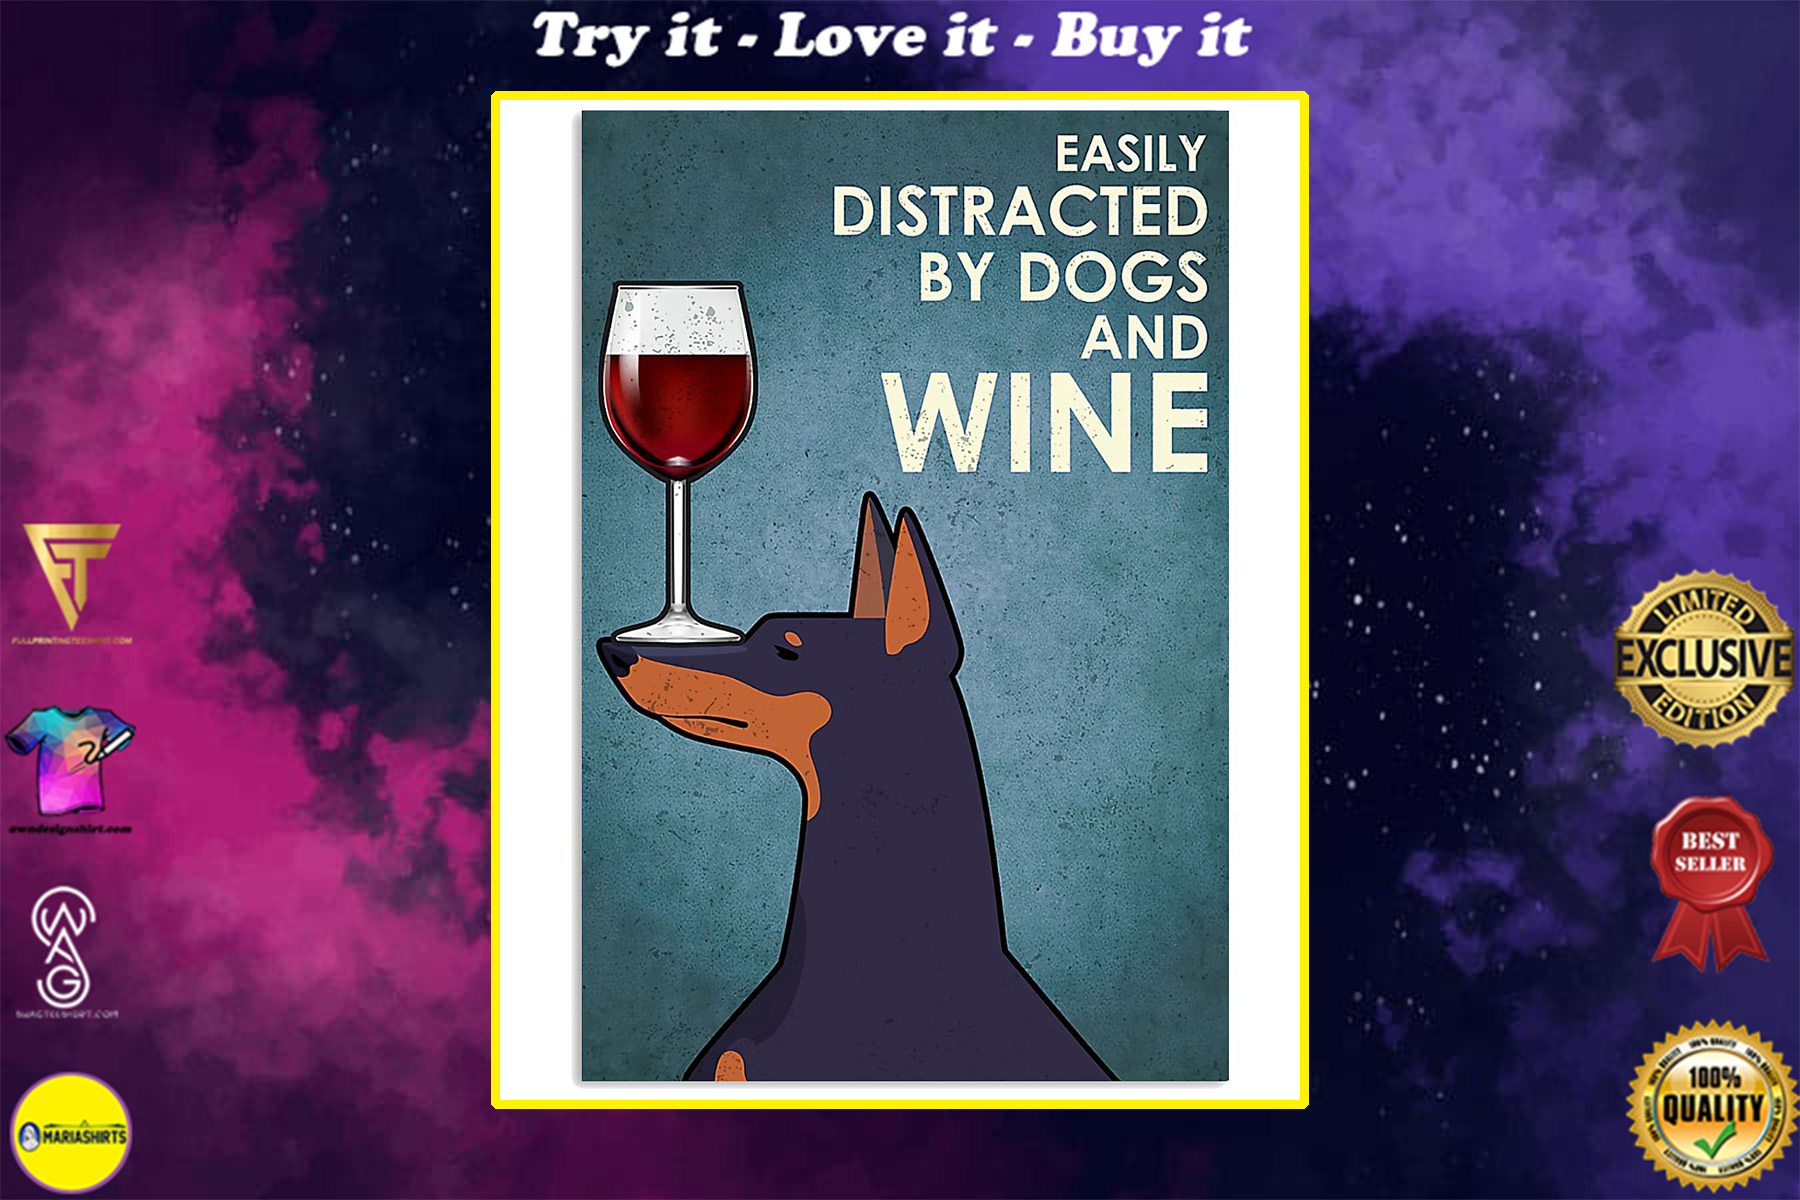 dog doberman easily distracted by dogs and wine poster